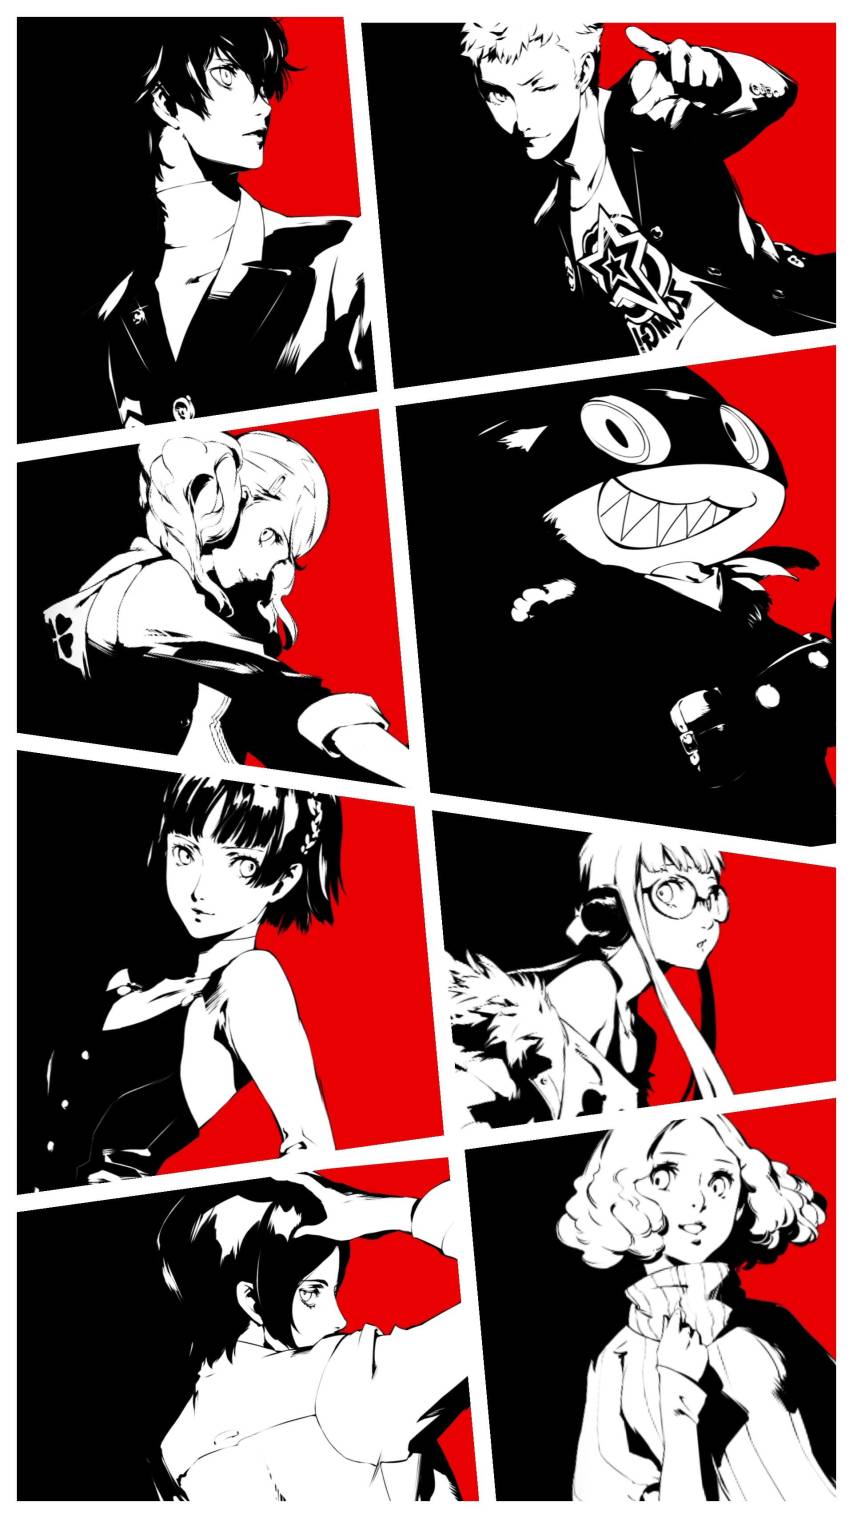 Persona 5 Mobile Wallpapers  Latest Persona 5 Mobile Backgrounds   WallpaperTeg